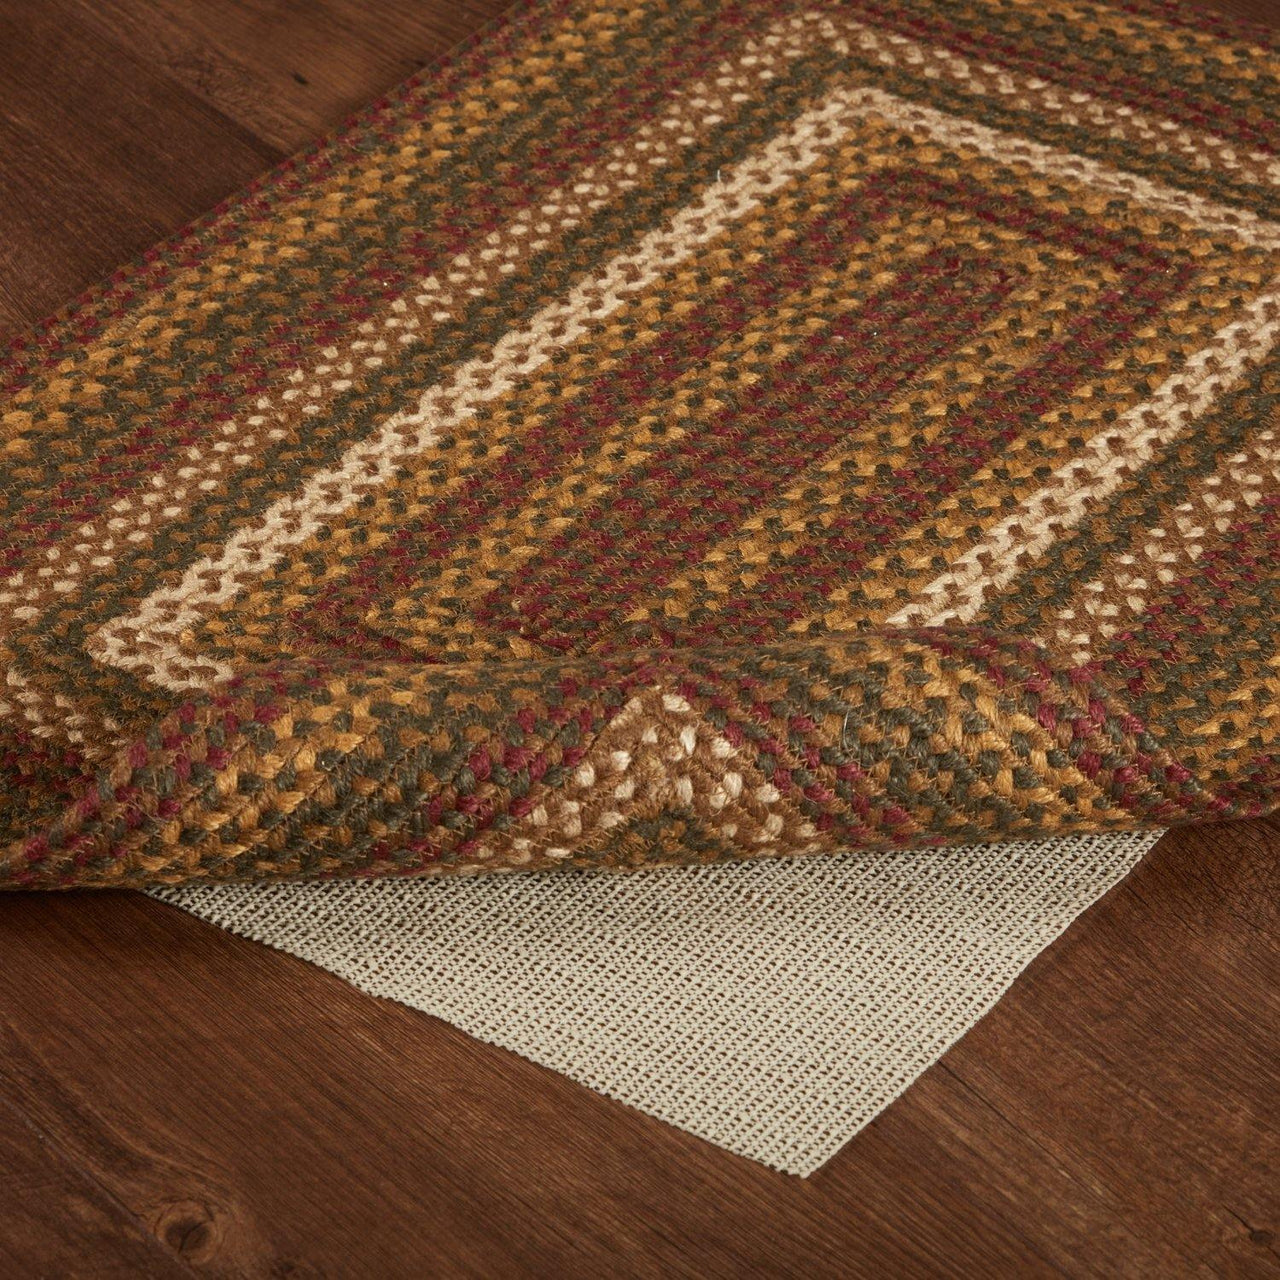 Tea Cabin Jute Braided Rug Rect 20"x30"with Rug Pad VHC Brands - The Fox Decor